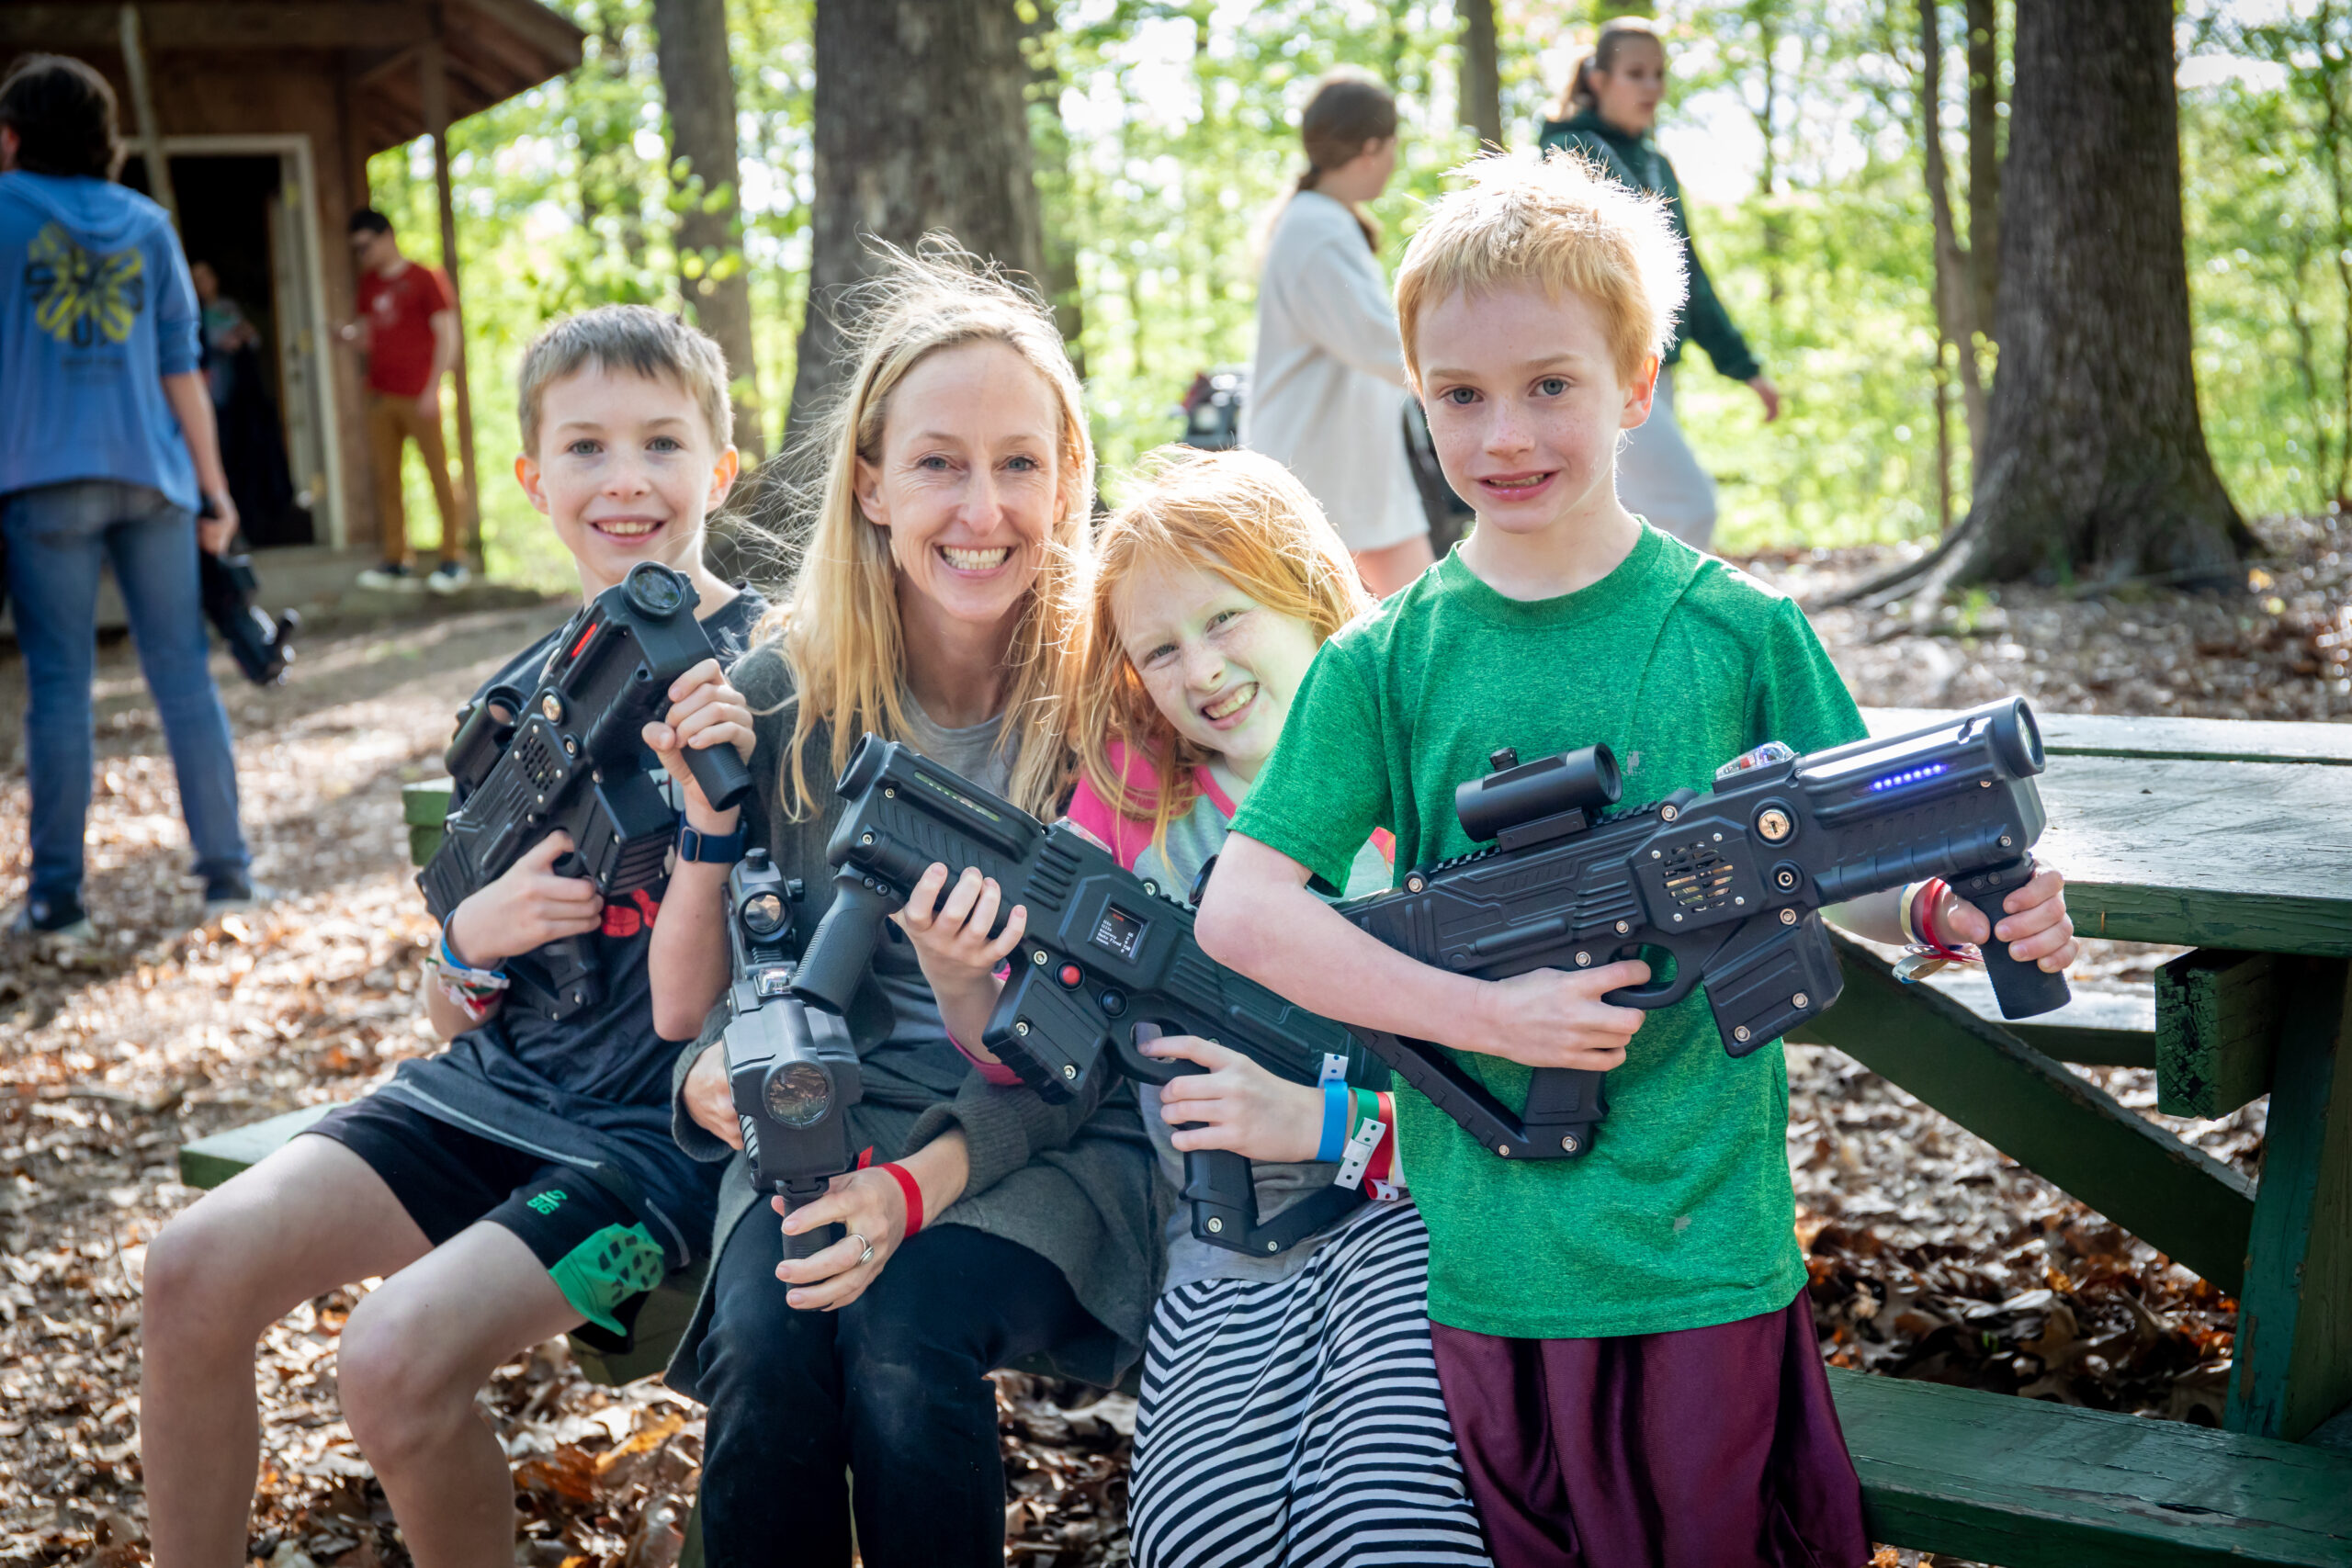 Mother and her children smile holding laser taggers at the laser tag arena during Deer Run Camps & retreats annual Family Day event.